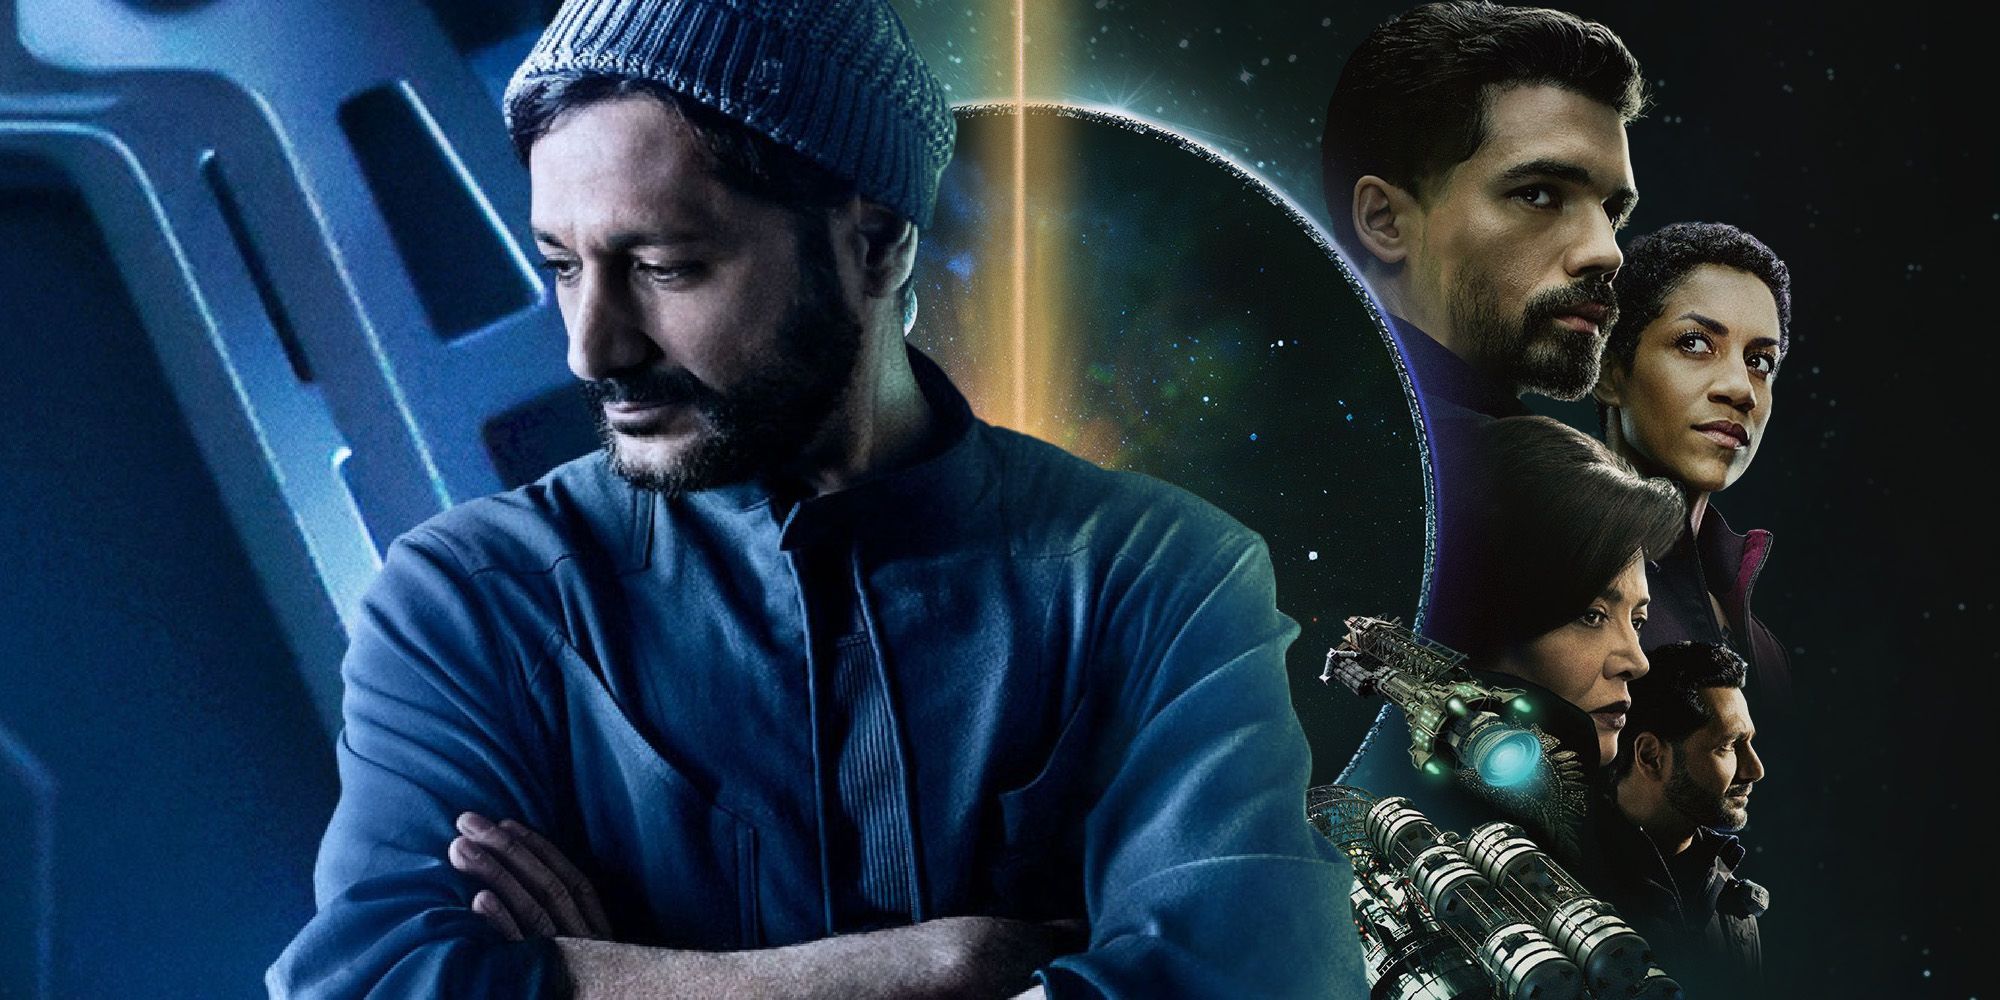 The Expanse Showrunner Talks About THAT Death Scene